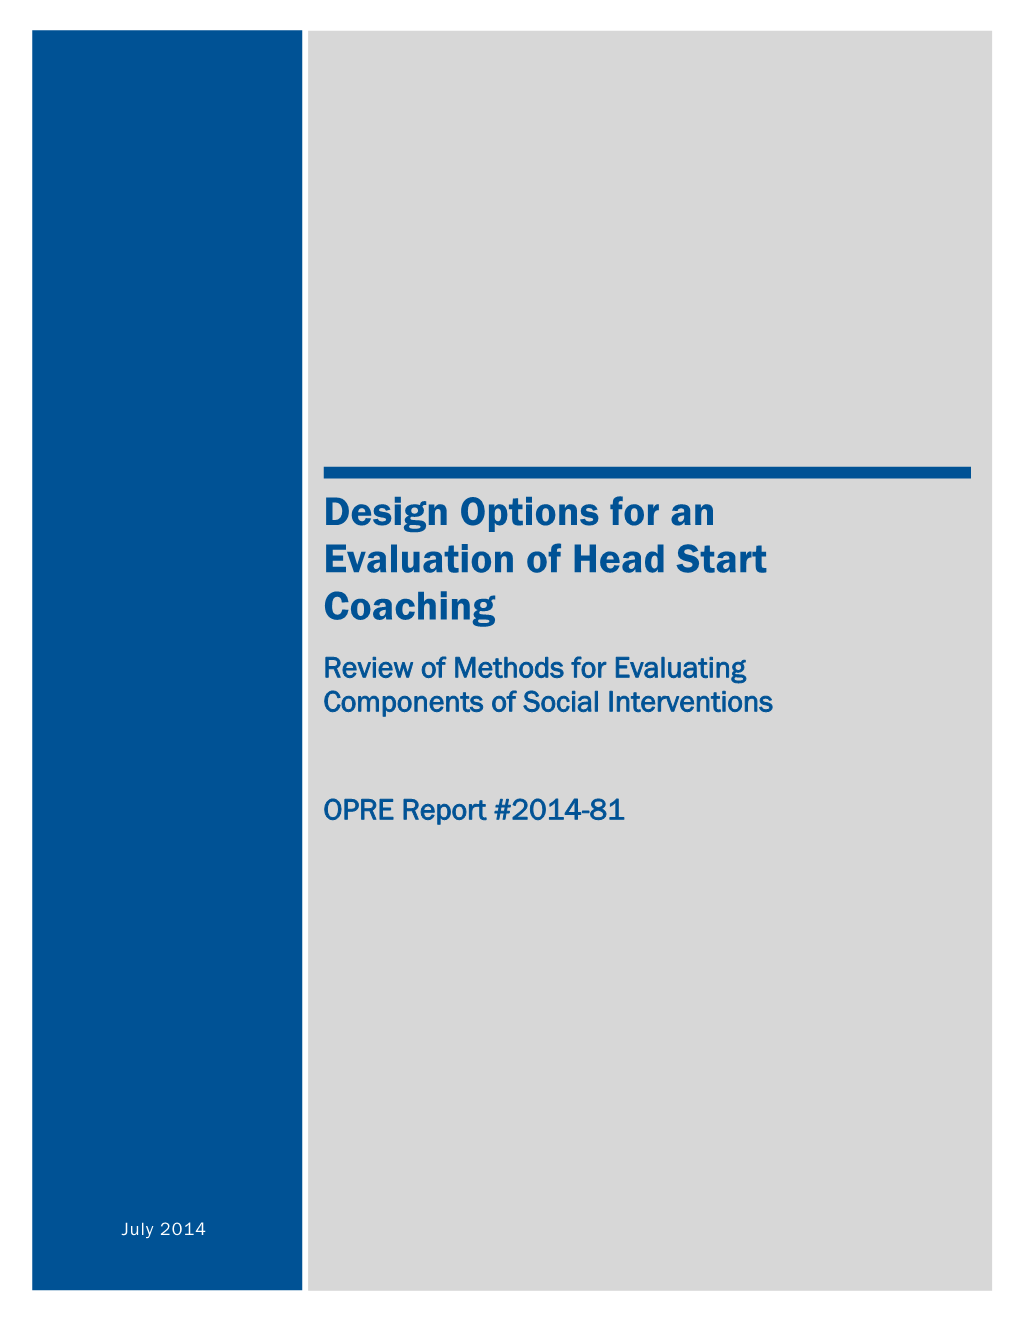 Design Options for an Evaluation of Head Start Coaching Review of Methods for Evaluating Components of Social Interventions